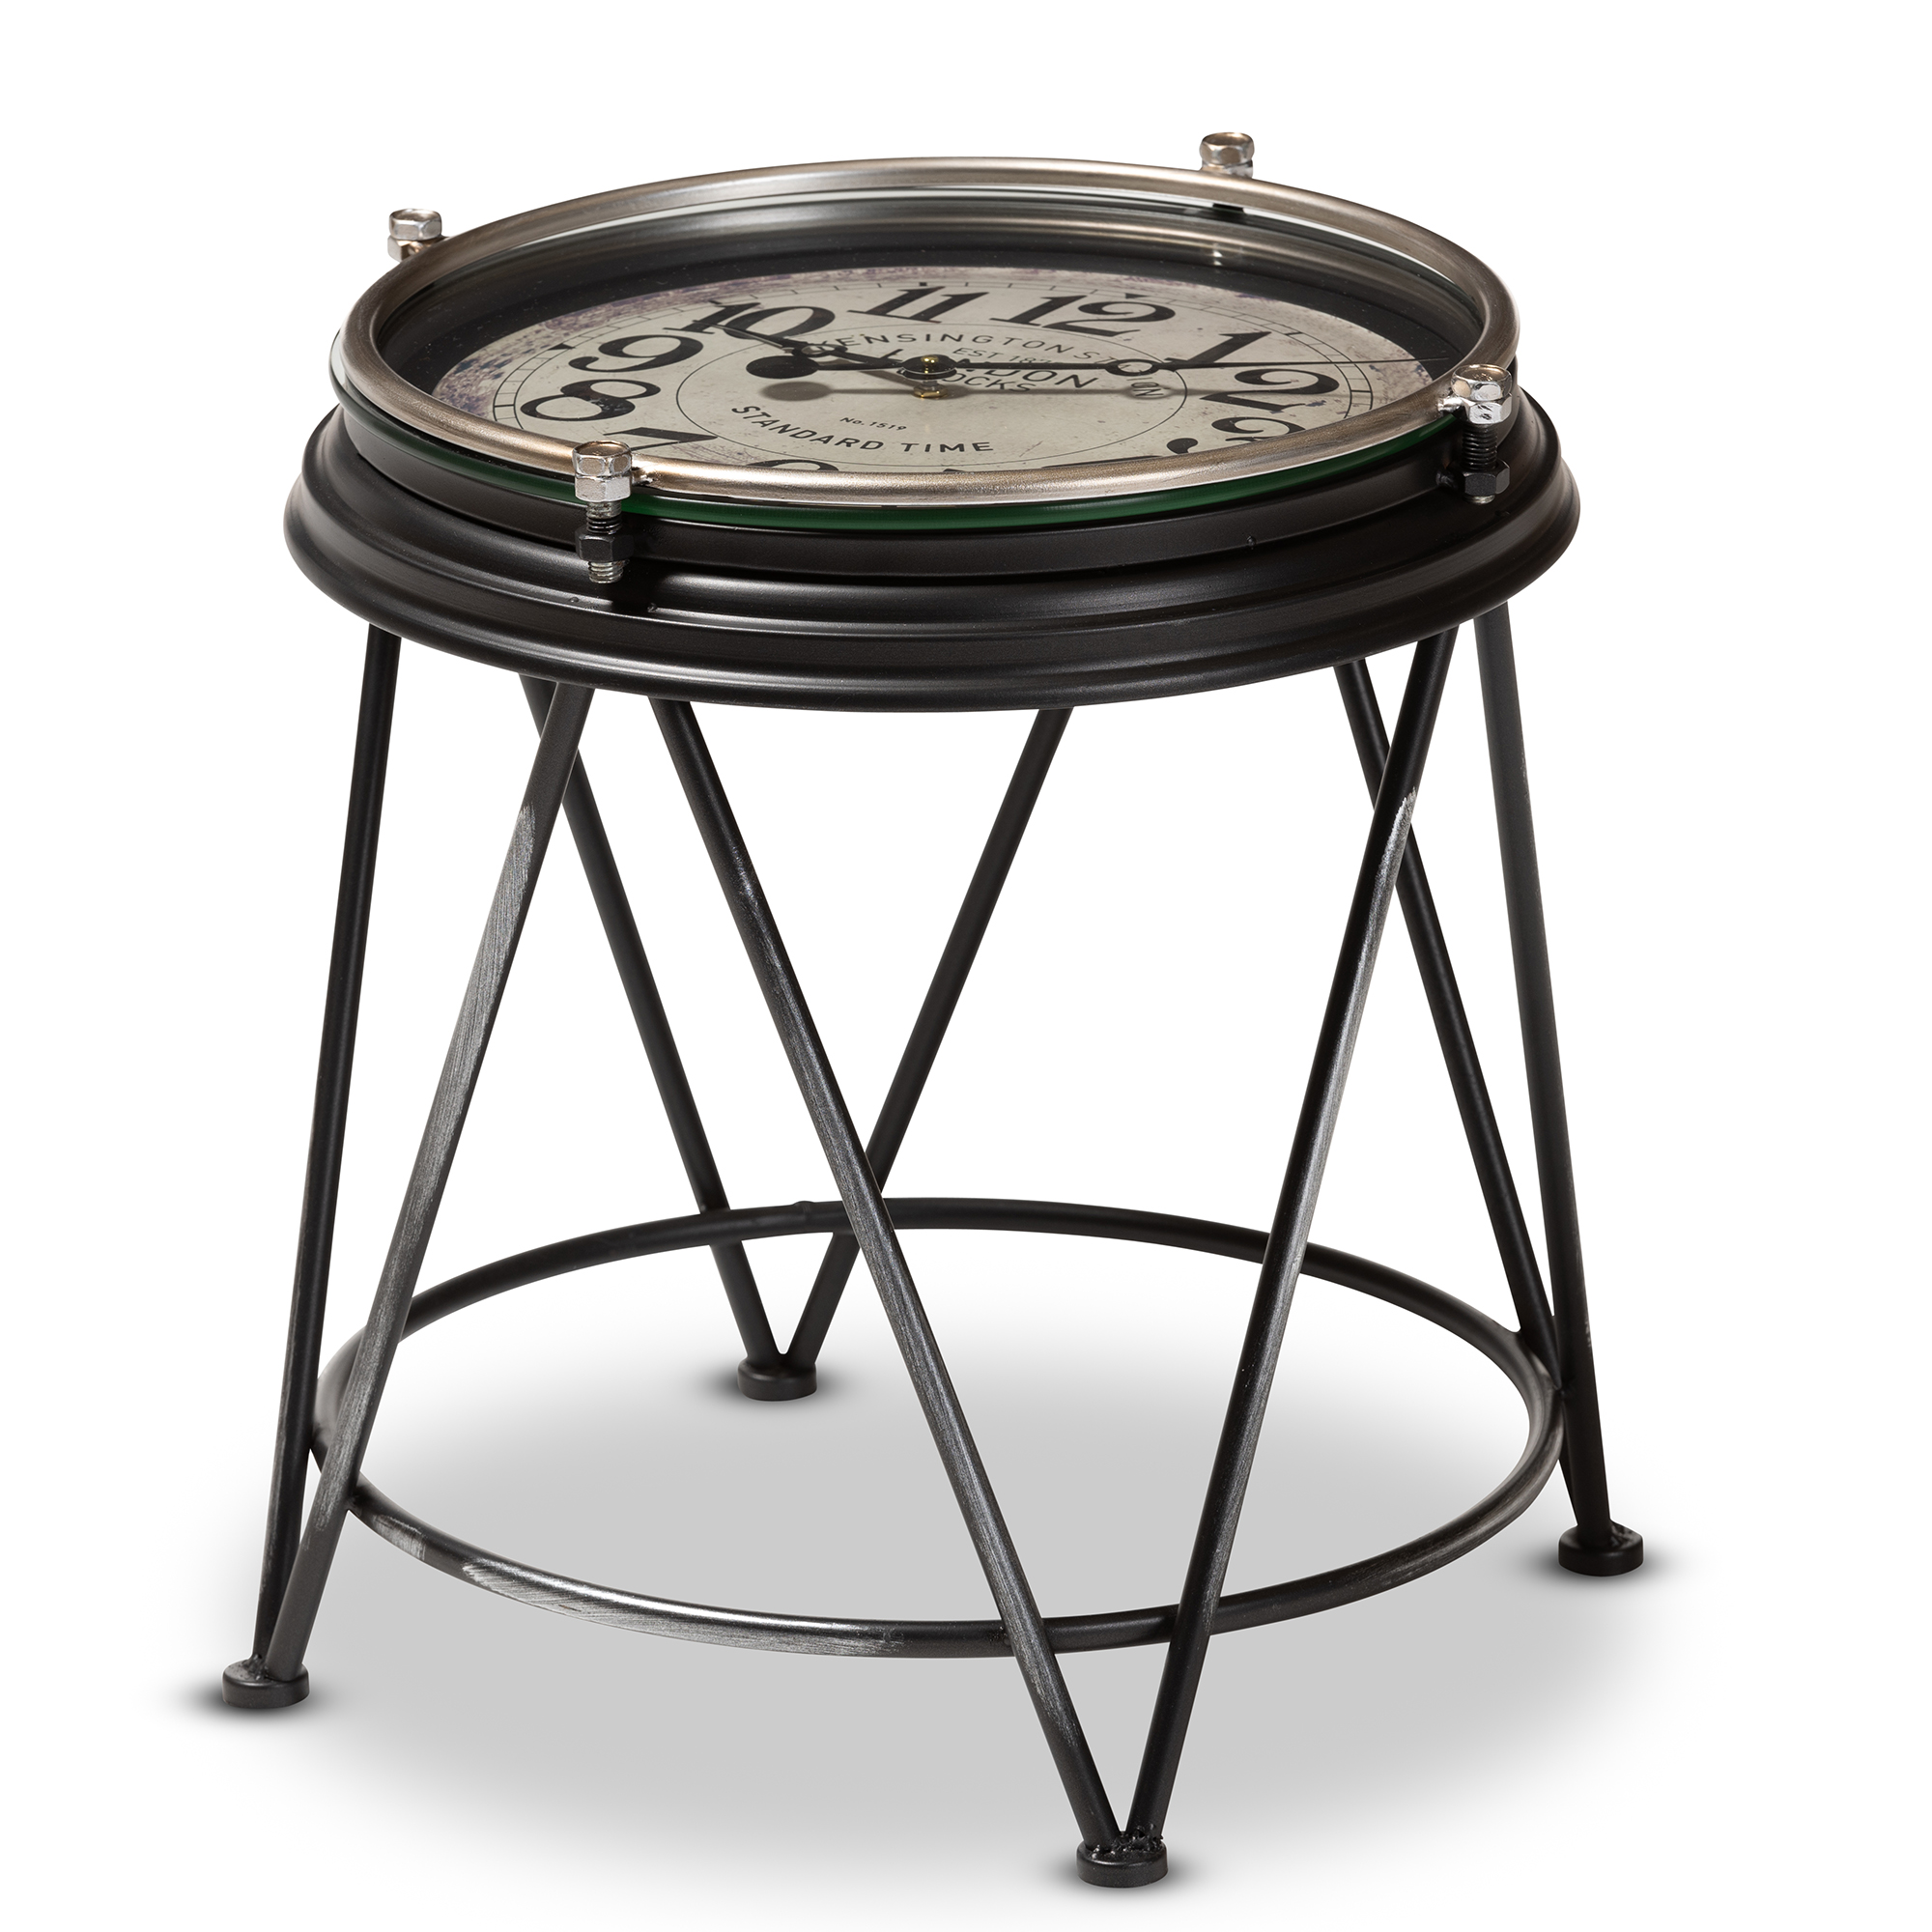 baxton studio giles vintage industrial matte black finished metal accent table with inlaid clock round marble coffee target small white gloss console ikea cocktail tables red